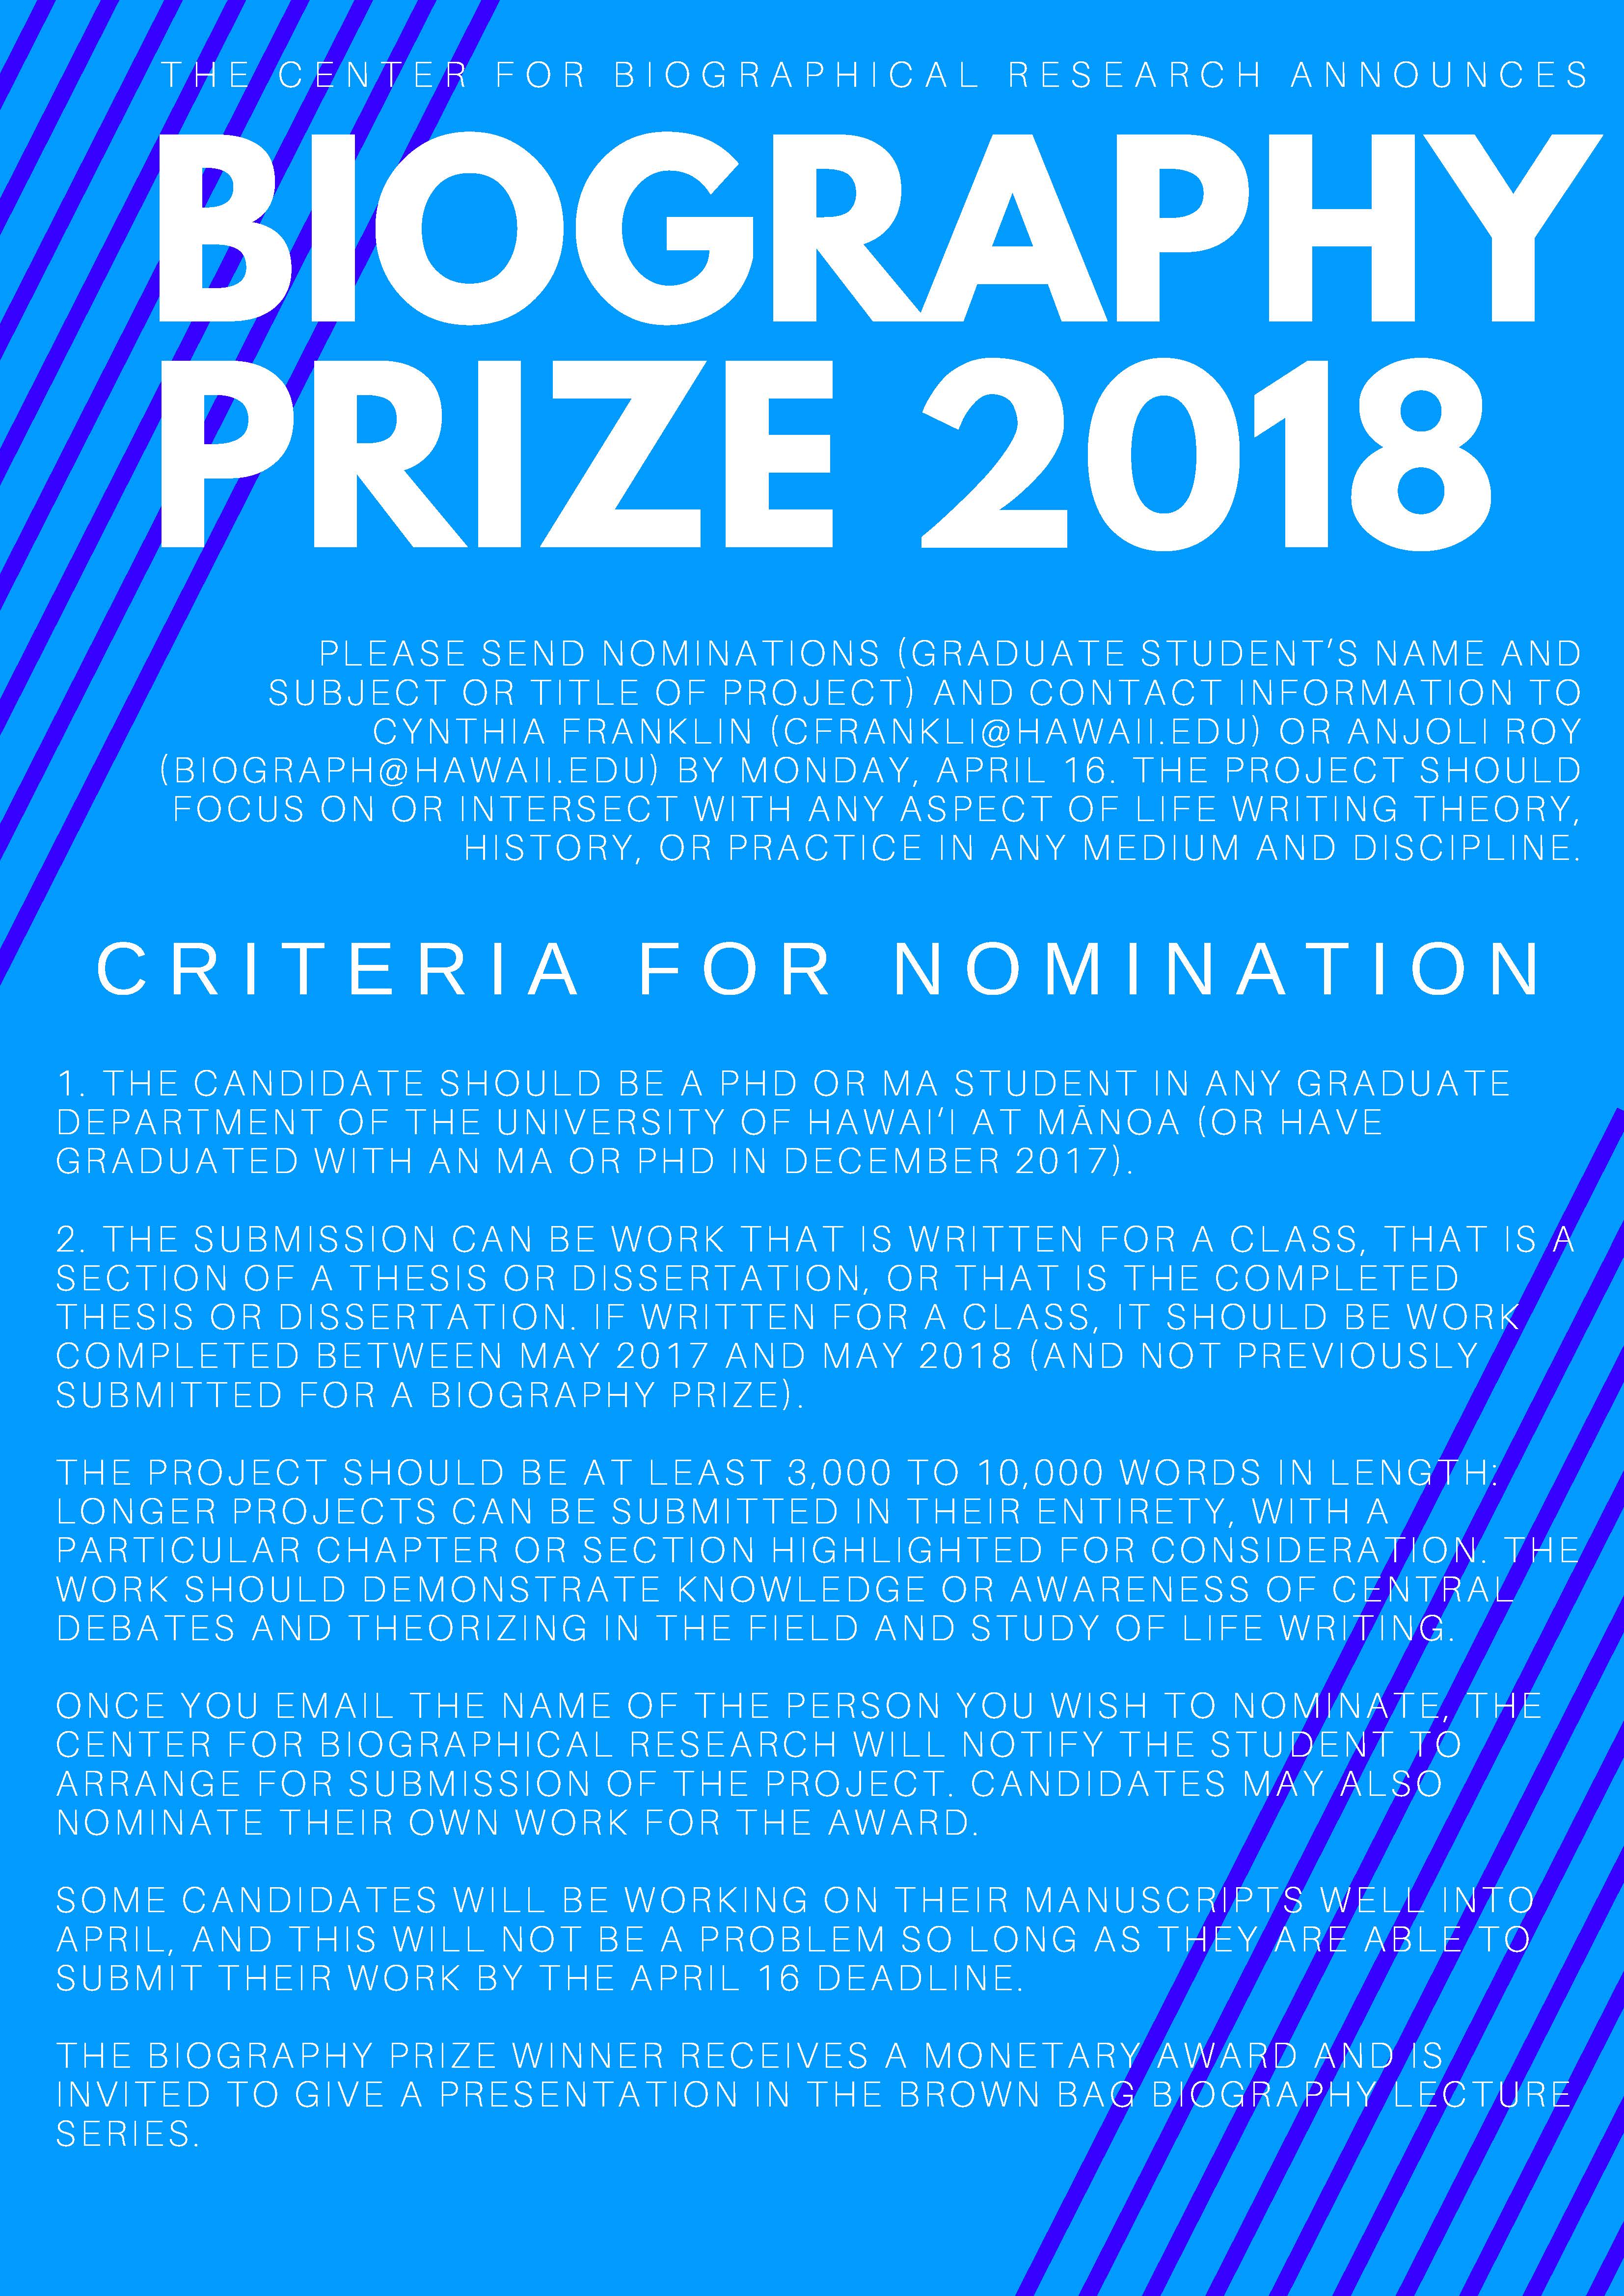 Biography Prize 2018 Announcement